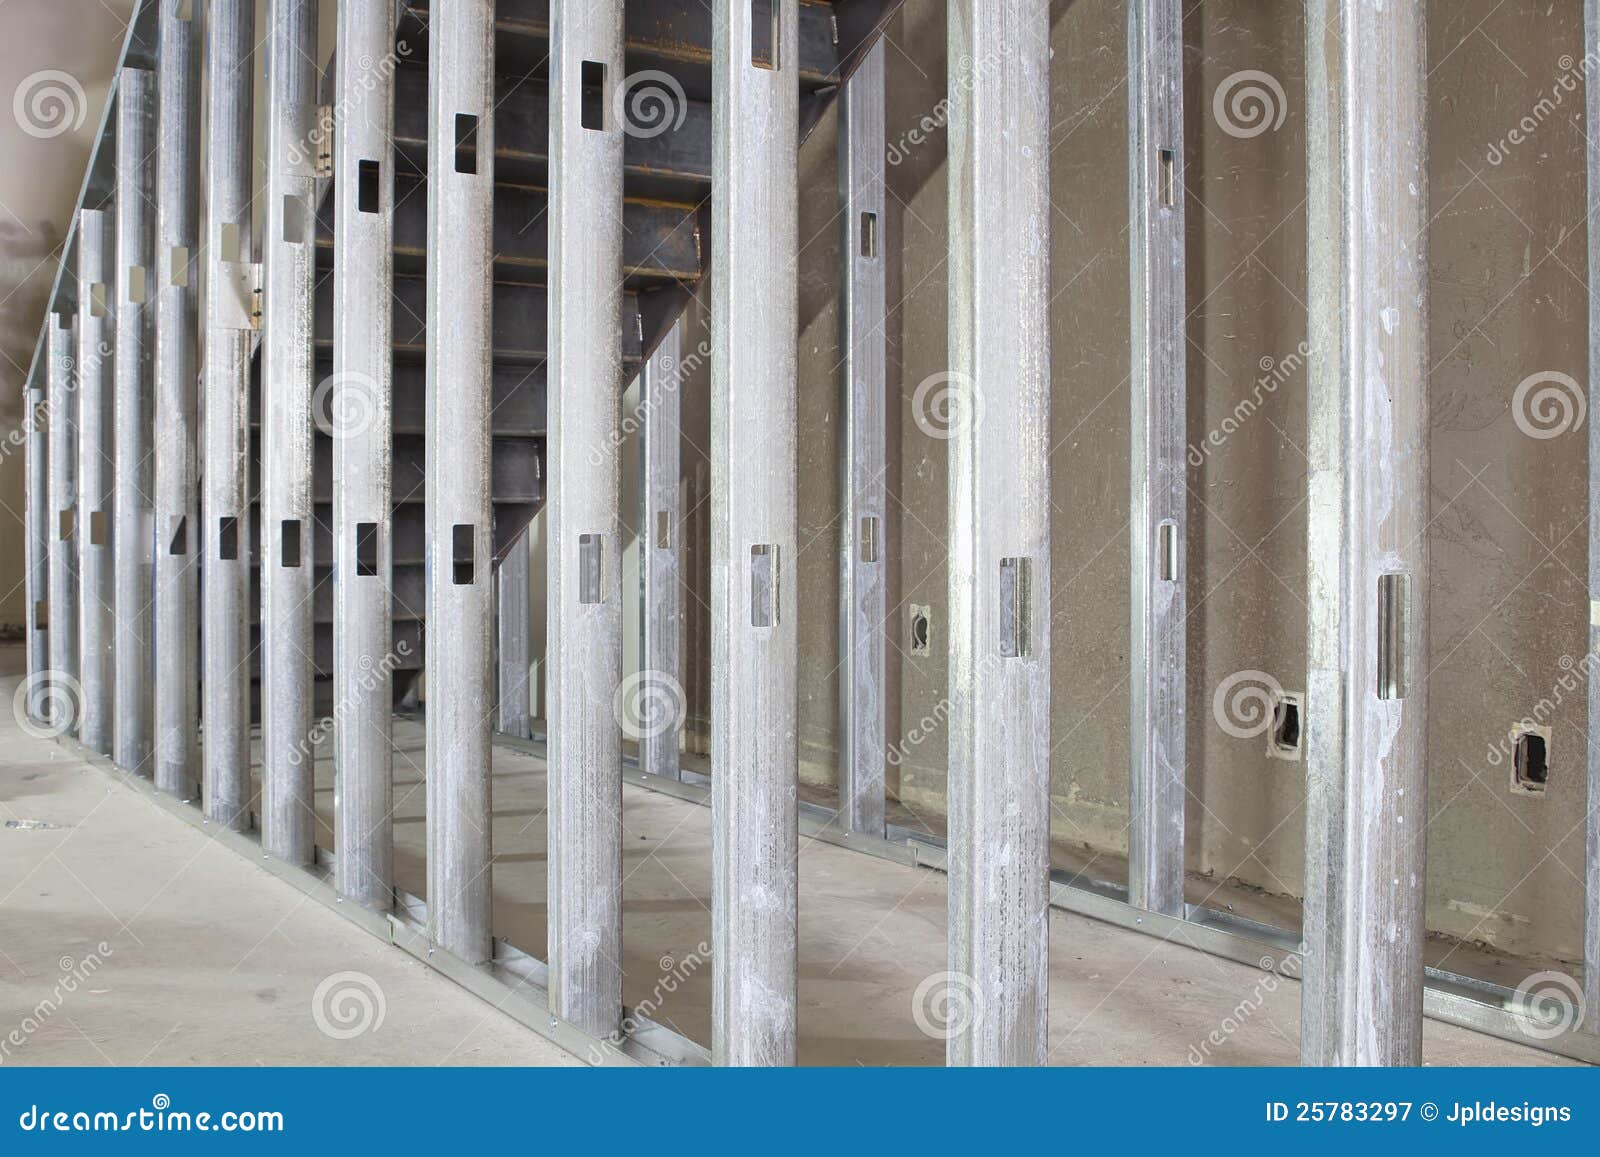 929 Commercial Framing Photos Free Royalty Free Stock Photos From Dreamstime